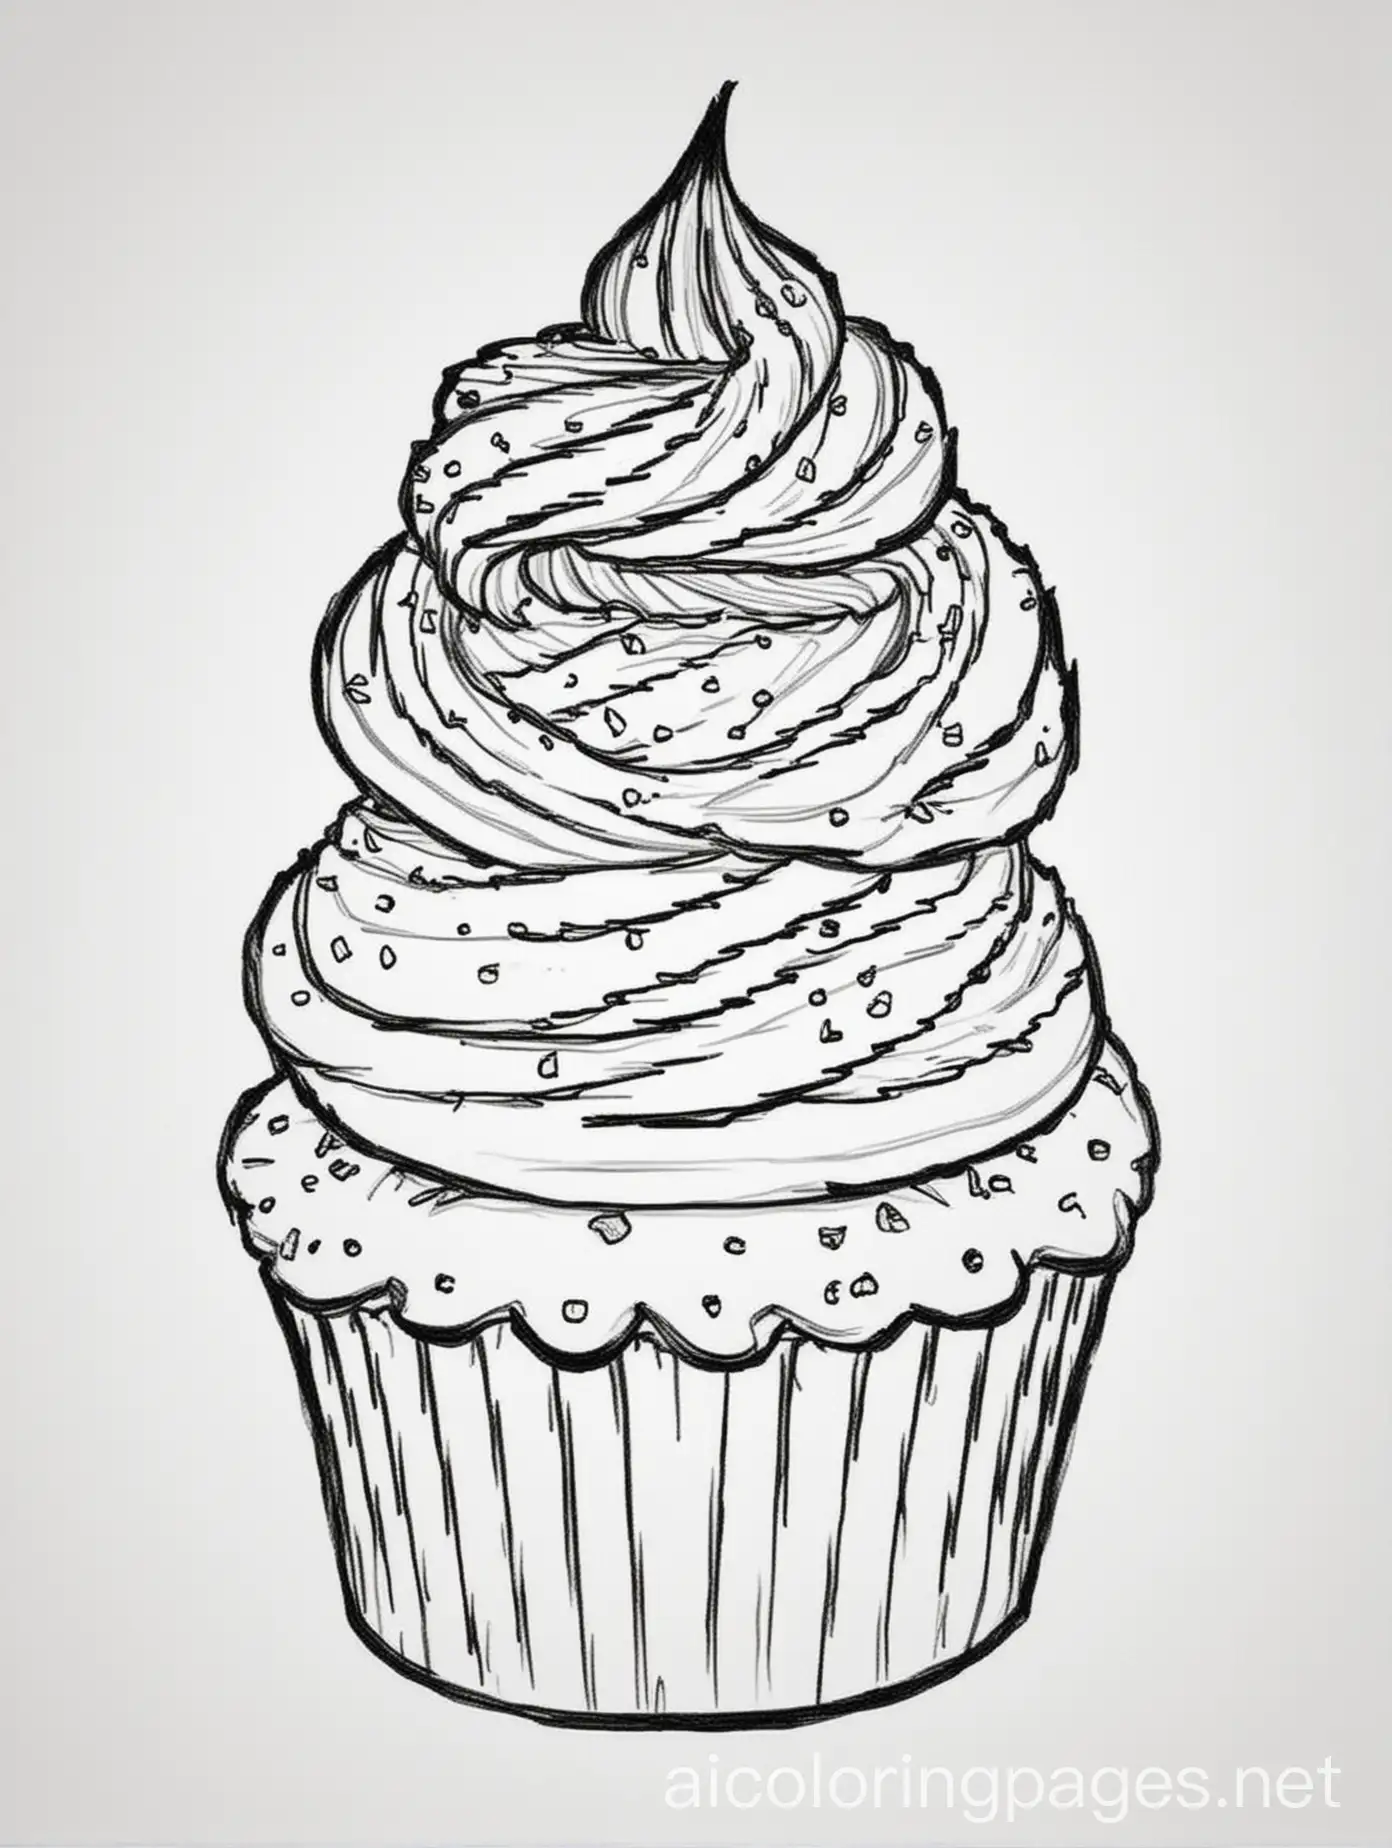 Cupcakes,nColoring Page, black and white, line art, white background, Simplicity, Ample White Space.nThe background of the coloring page is plain white to make it easy for young children to color within the lines. The outlines of all the subjects are easy to distinguish, making it simple for kids to color without too much difficulty